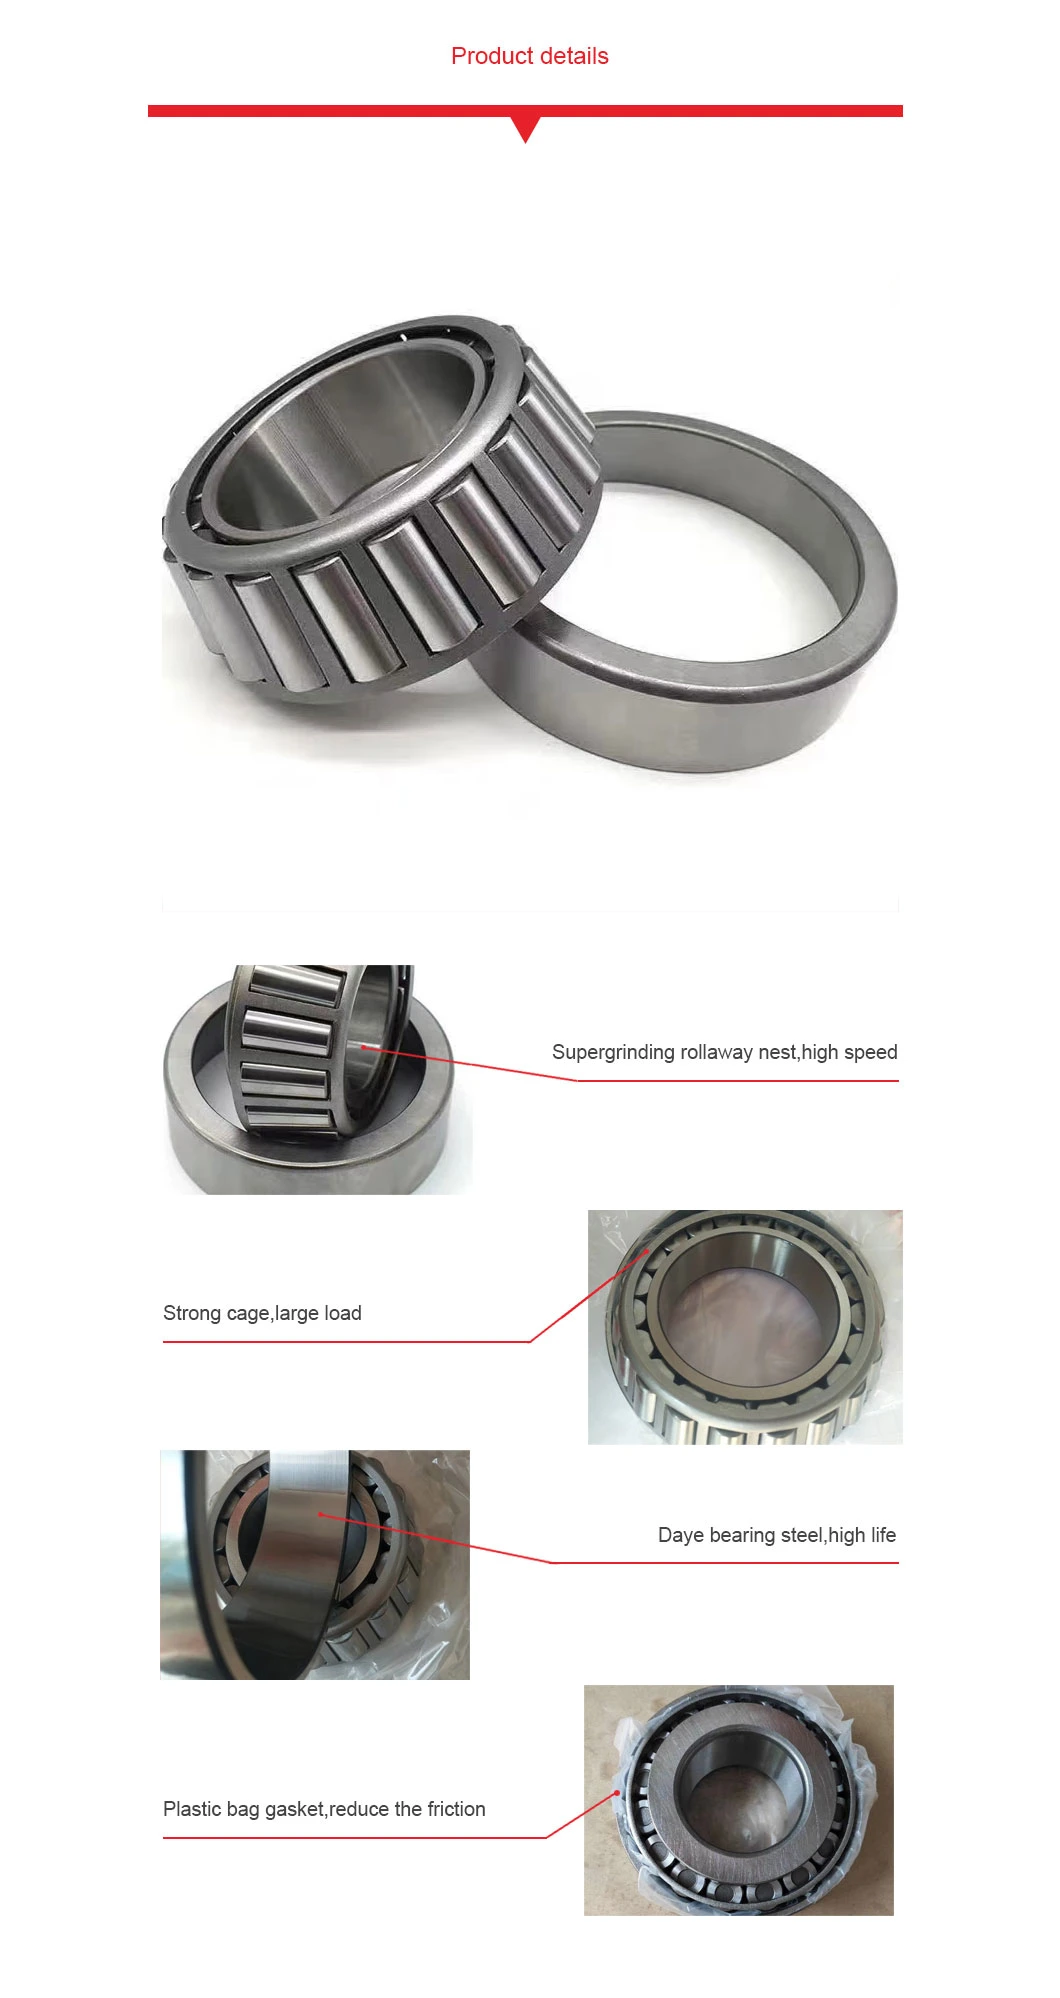 China Supplier Factory Price SKF NTN NSK IKO Taper Roller Bearing From China Bearing Manufacturer